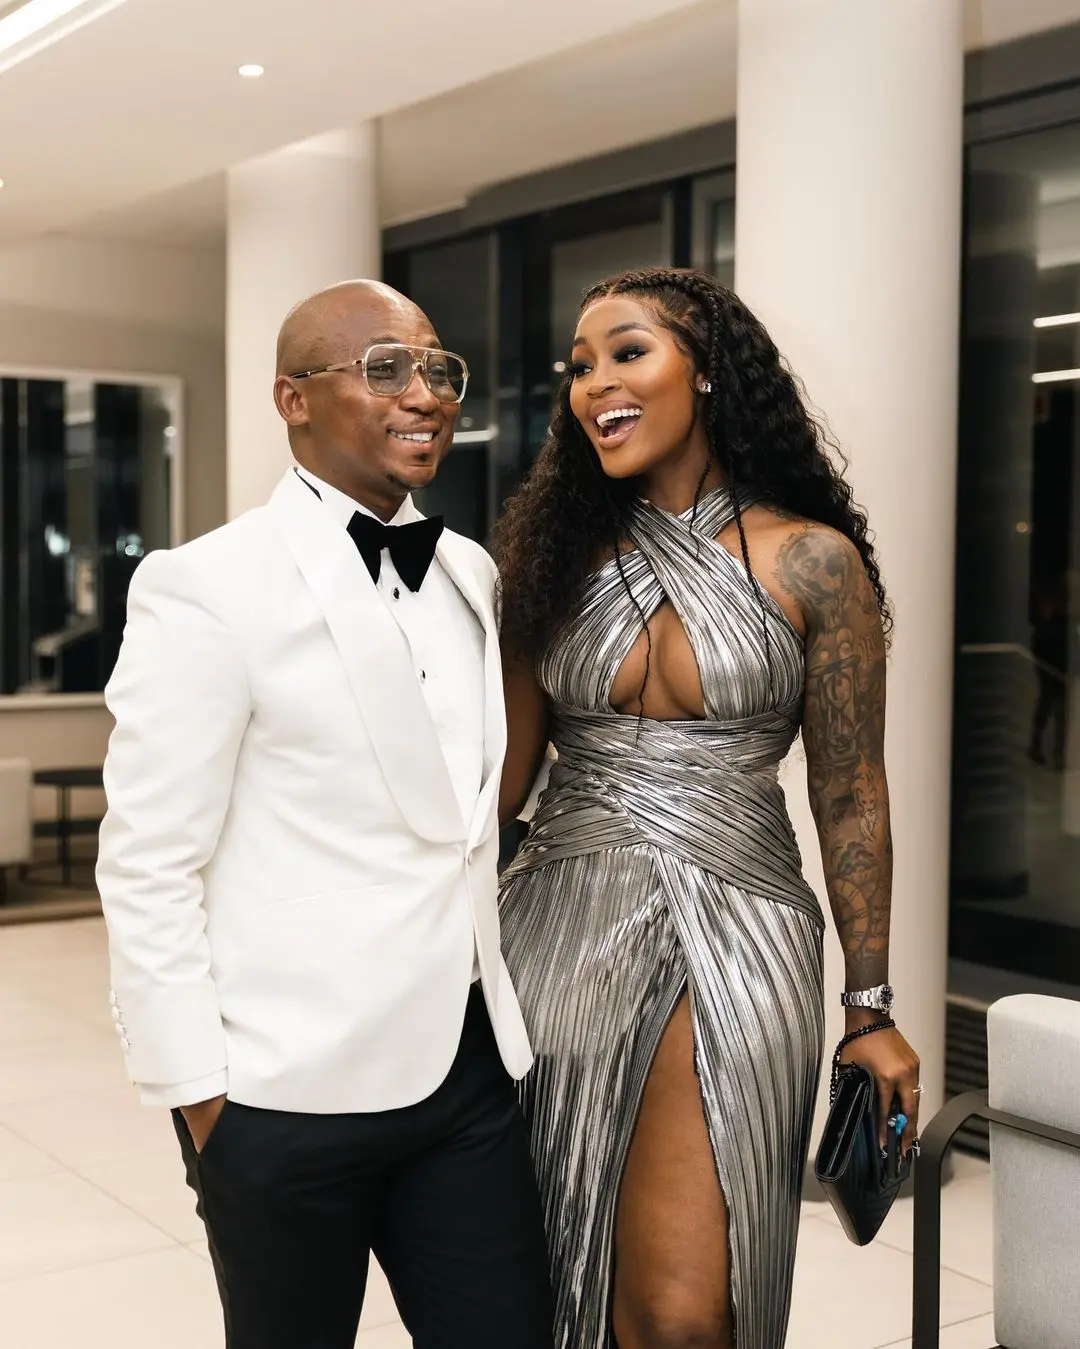 Photos: A look into Khuli Chana’s surprise party thrown by his wife, Lamiez Holworthy